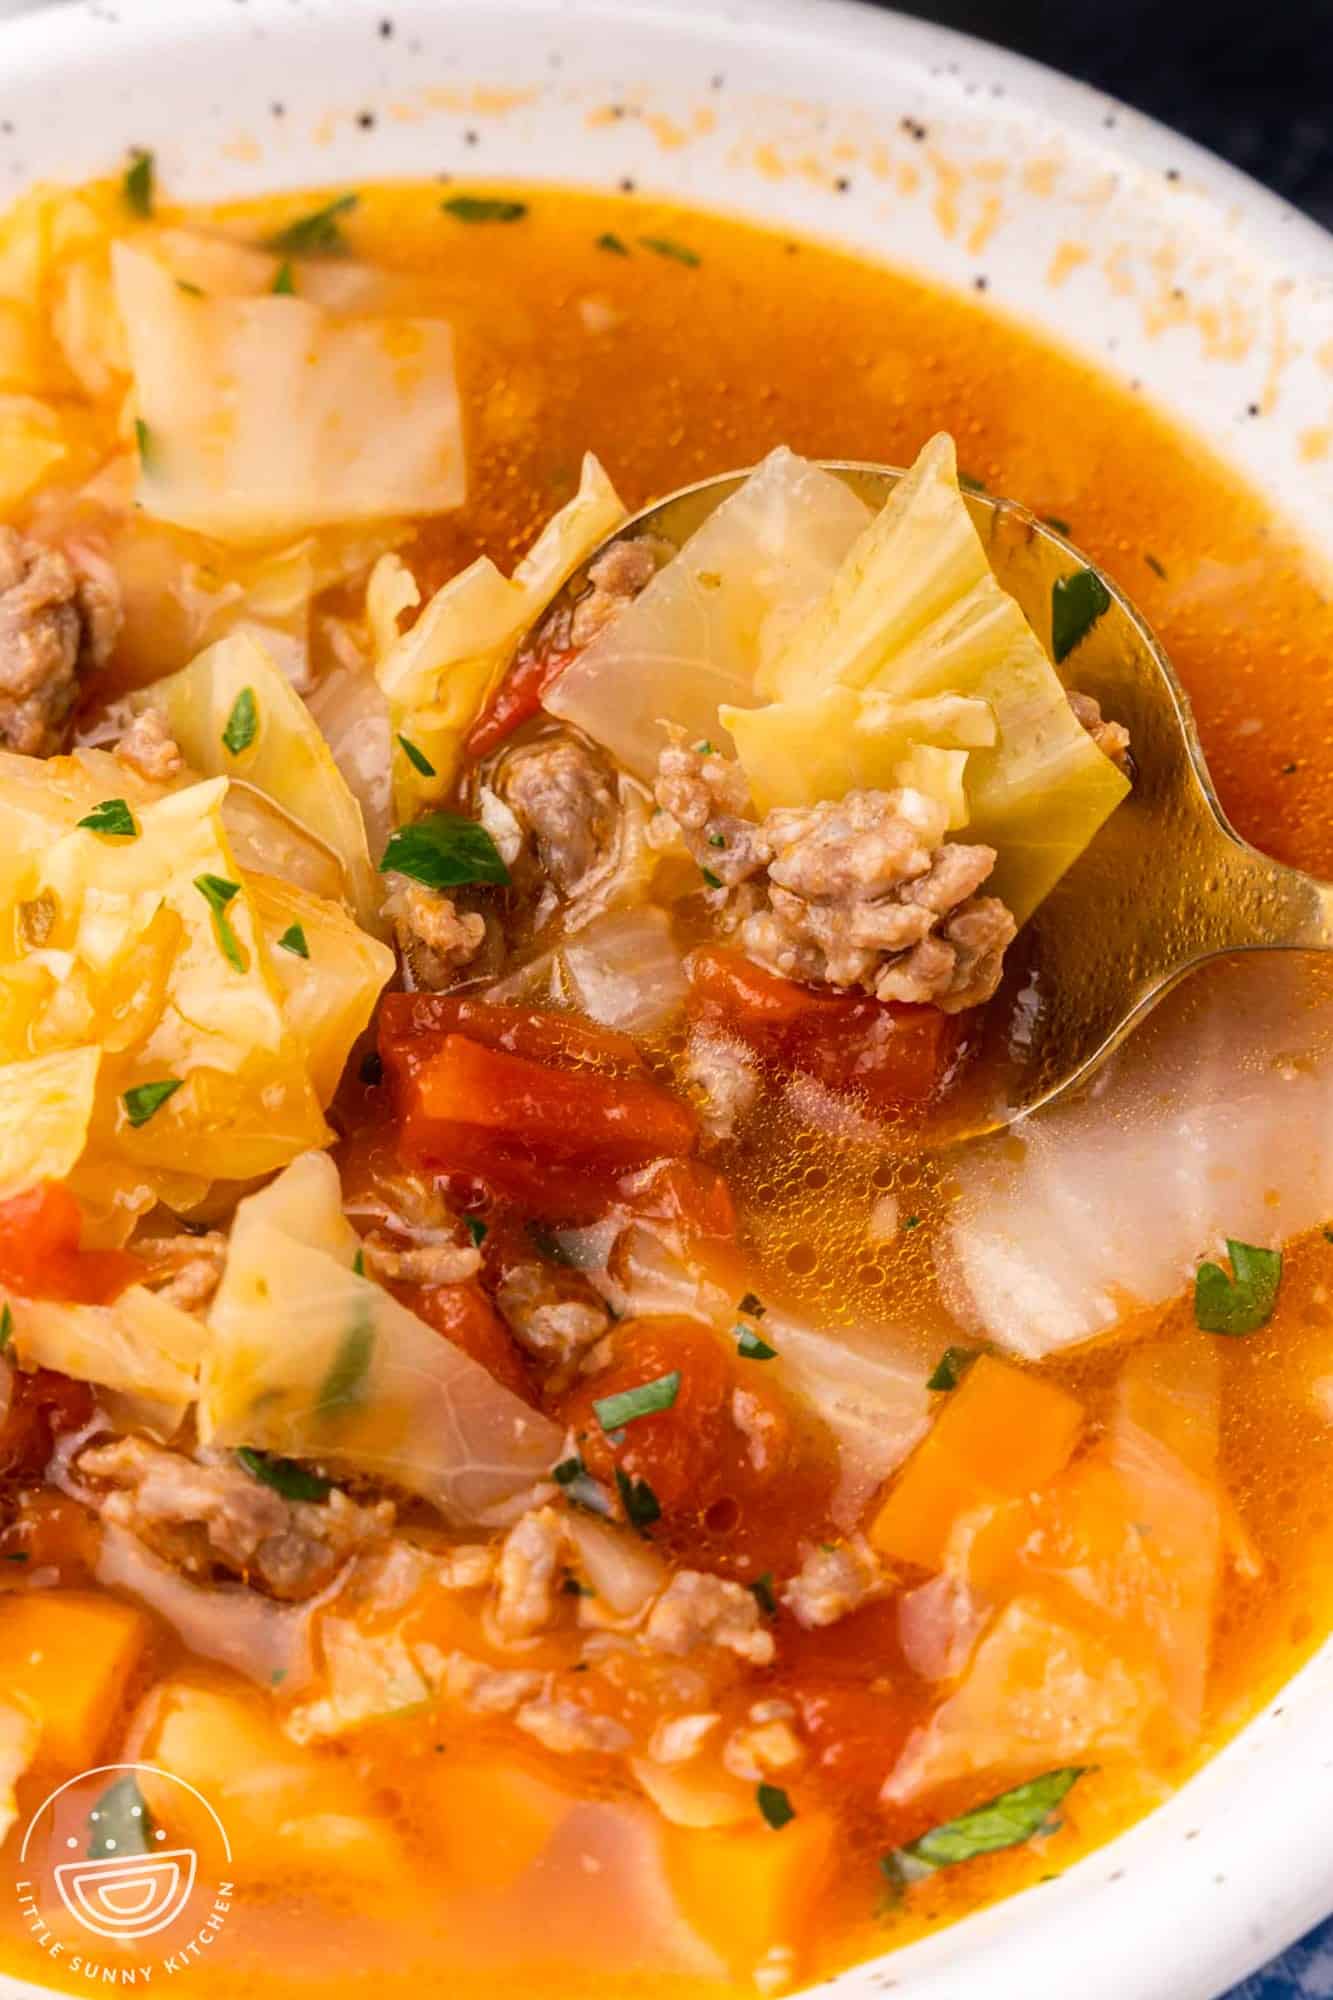 A white bowl of cabbage and sausage soup with tomatoes. A spoon is lifting up a bite.